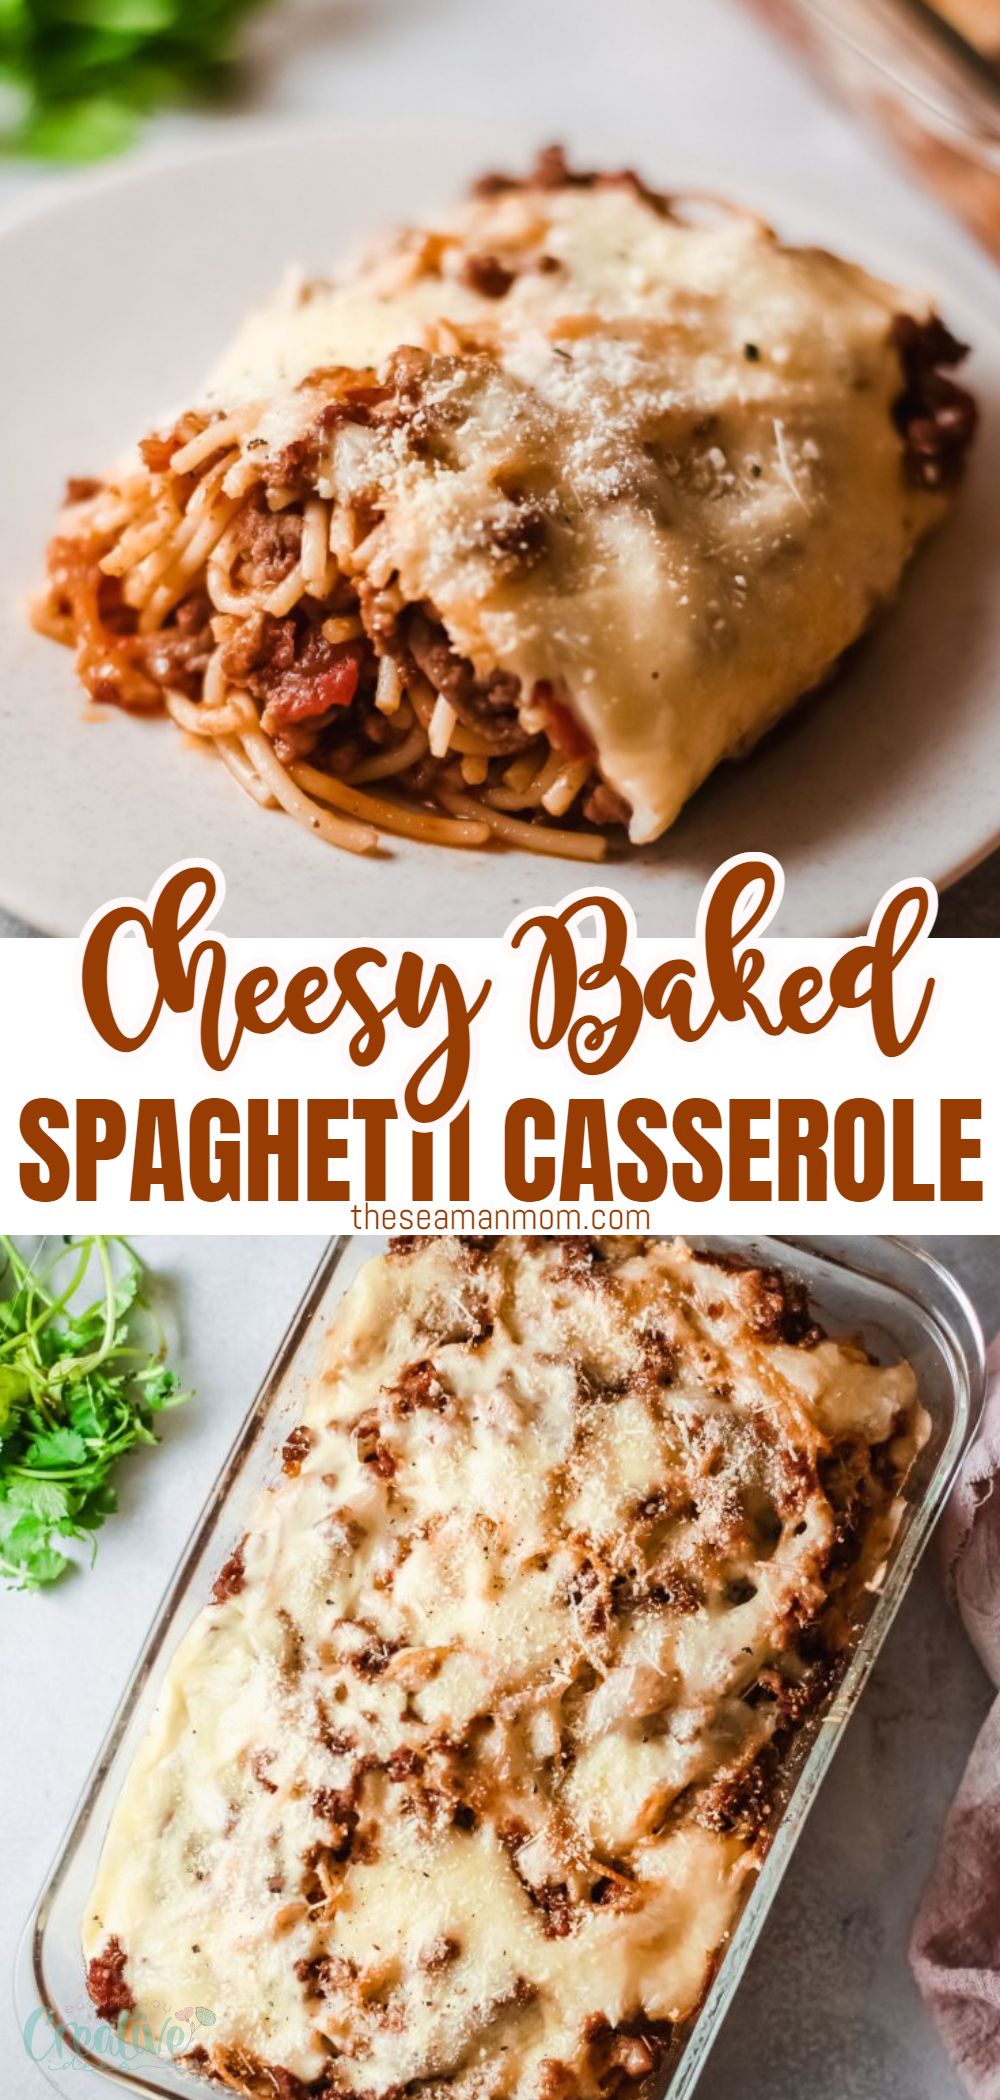 Cheesy baked spaghetti is a delicious recipe perfect to make when you are short on time or are looking for a crowd-pleasing recipe. Budget friendly and incredibly delicious and easy, this baked spaghetti recipe tastes just like lasagna but made in a third of the time! via @petroneagu